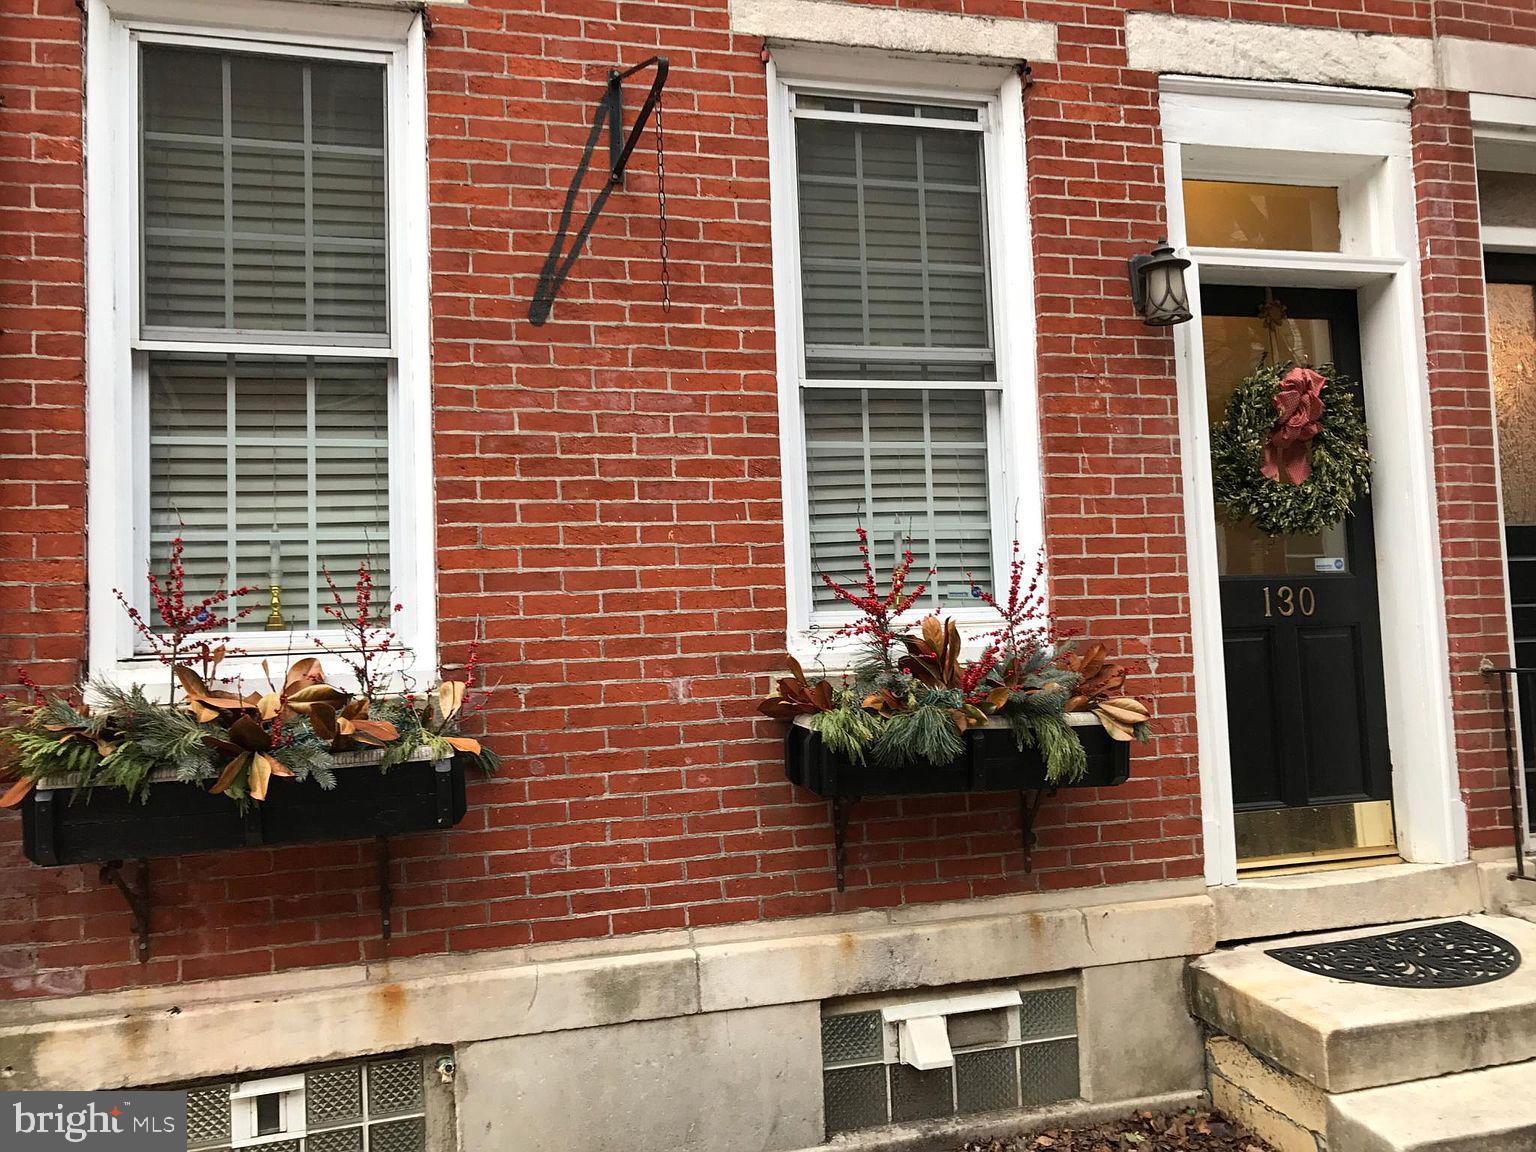 a potted plant sitting on the side of a brick building